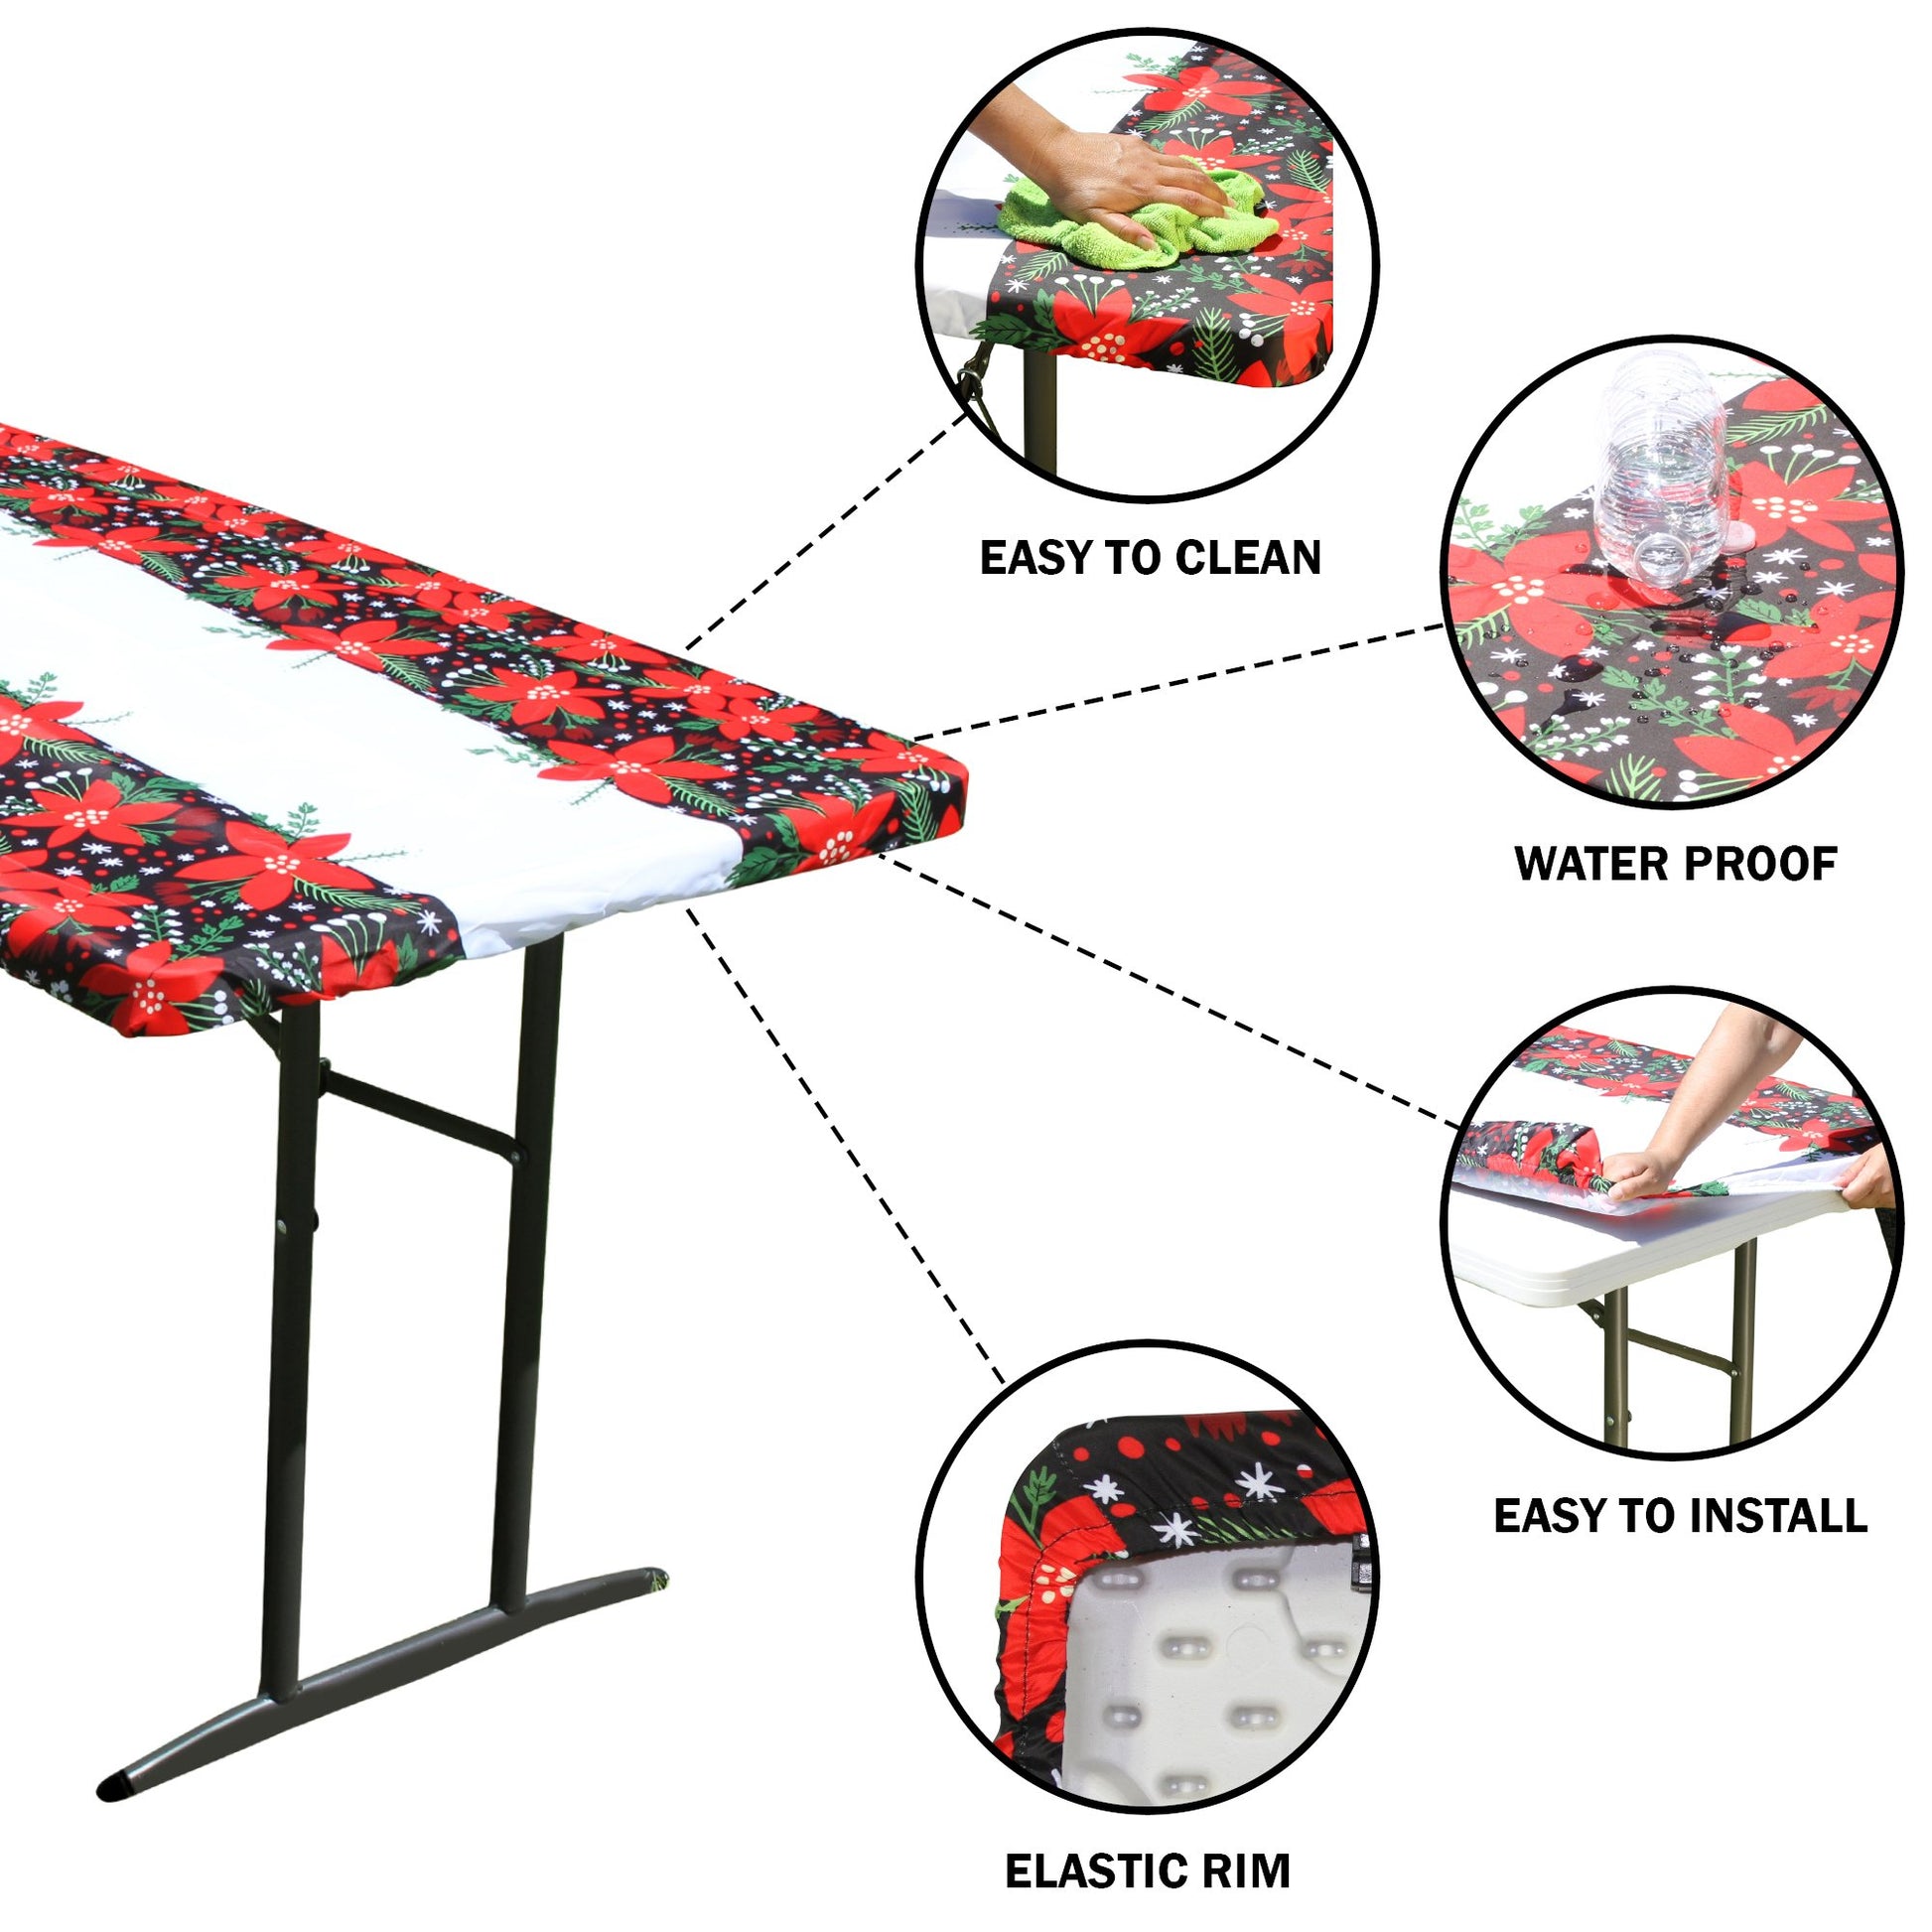 TableCloth PLUS 72" Winter Fitted Polyester Tablecloth for 6' Folding Tables is easy to clean, water proof, easy to install, and has an elastic rim